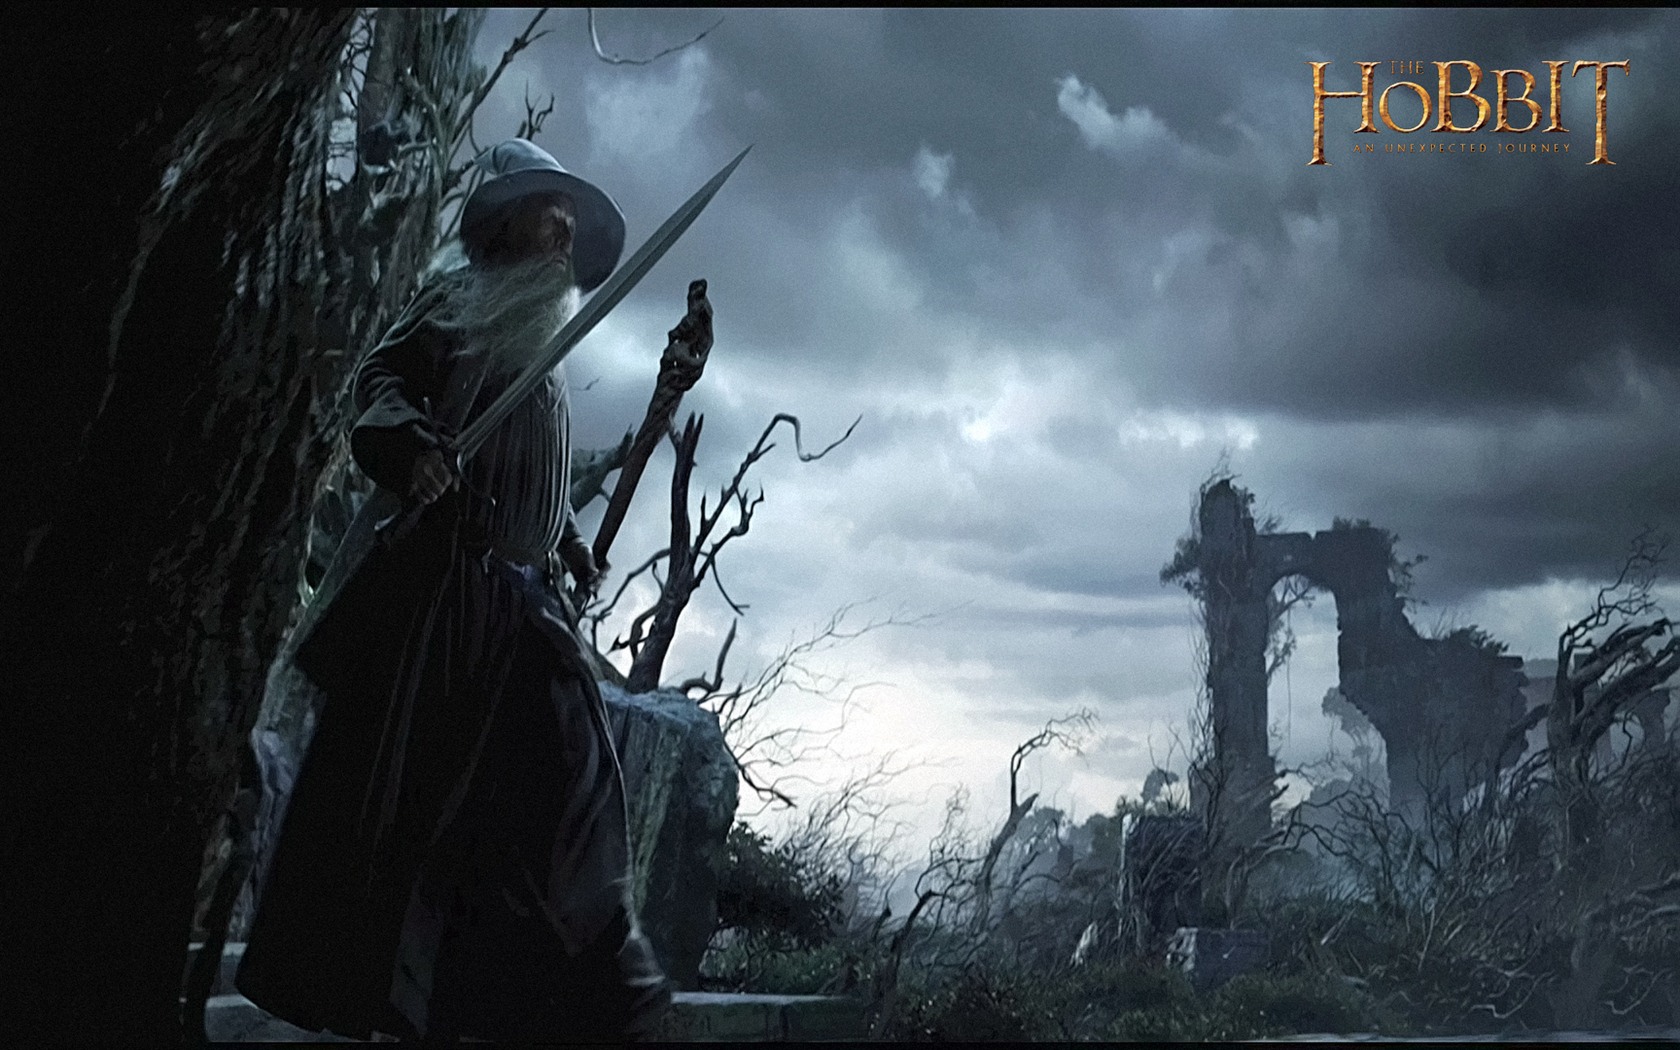 The Hobbit: An Unexpected Journey HD wallpapers #13 - 1680x1050